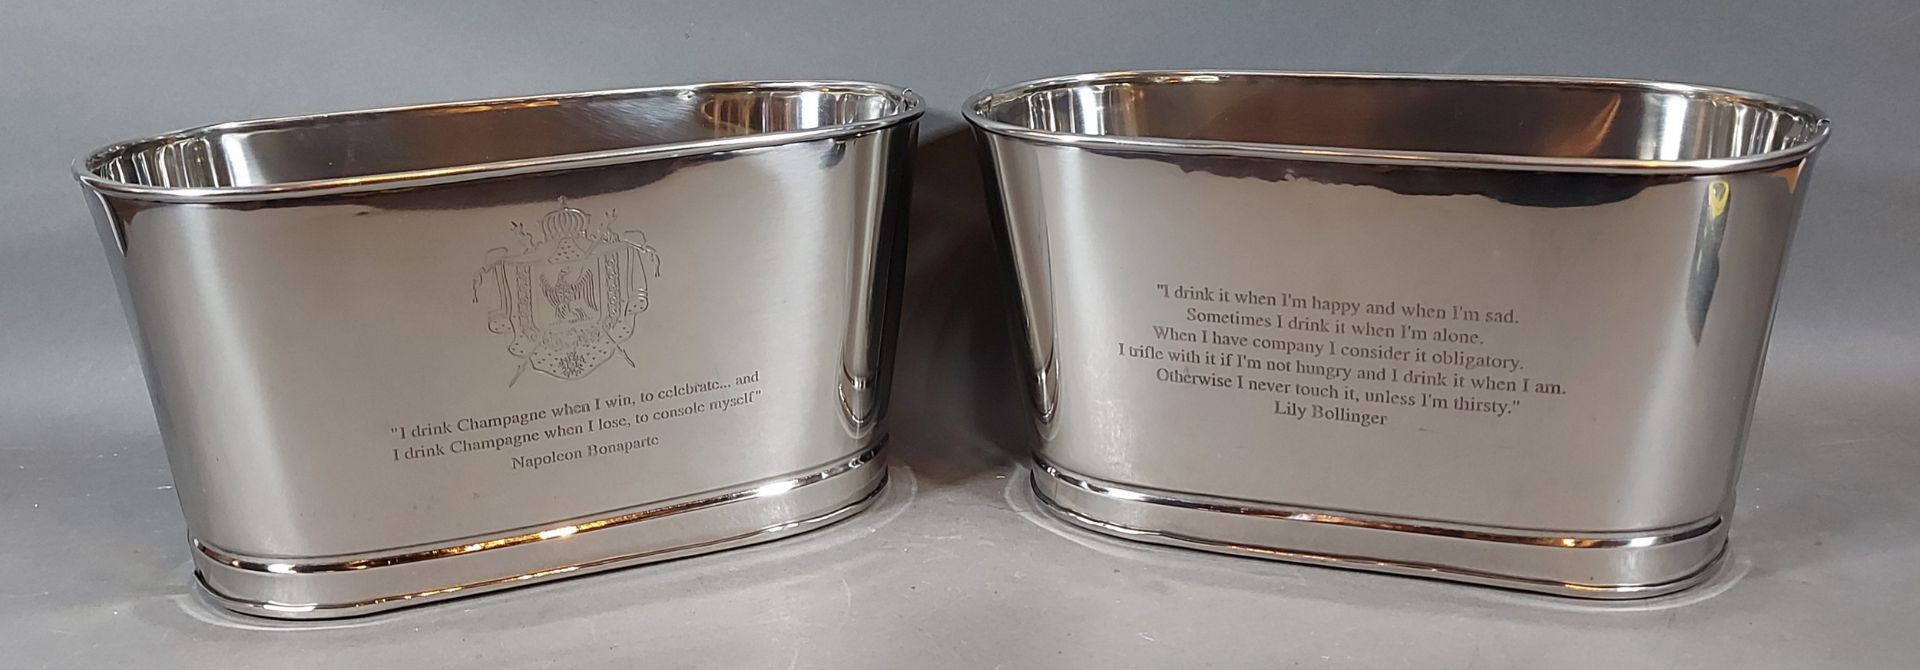 A Pair Of Large Oval Champagne Coolers Lily Bollinger (1899-1977) / Napoleon Bonaparte Quote